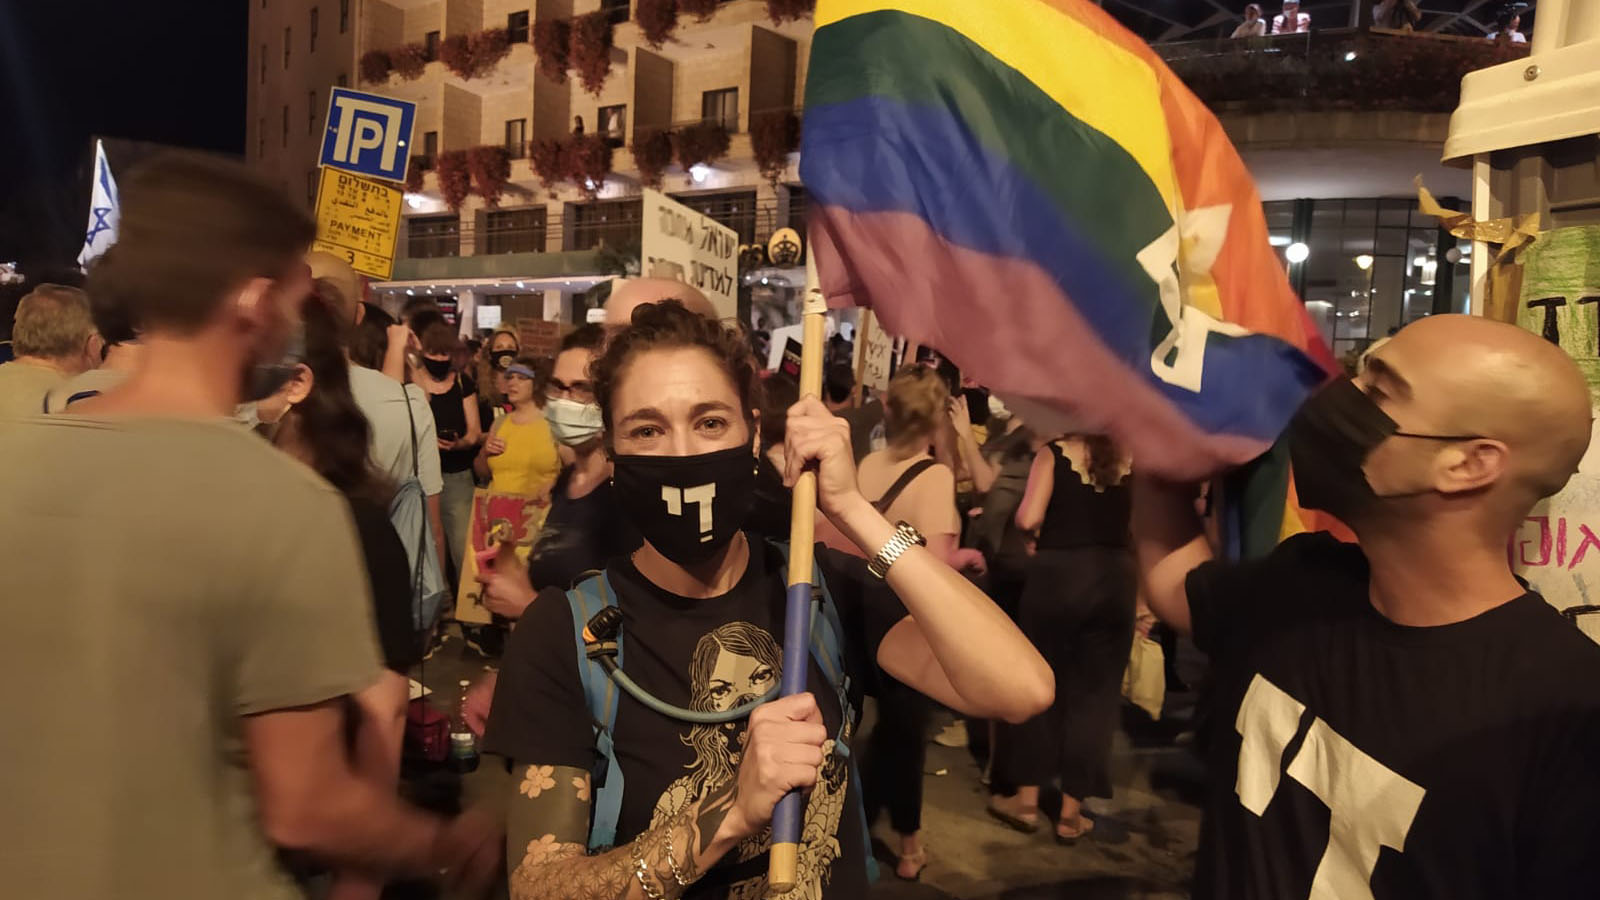 Jasmine, 36, from Tel Aviv, came because there is no equality. (Photo: Yahel Faraj)